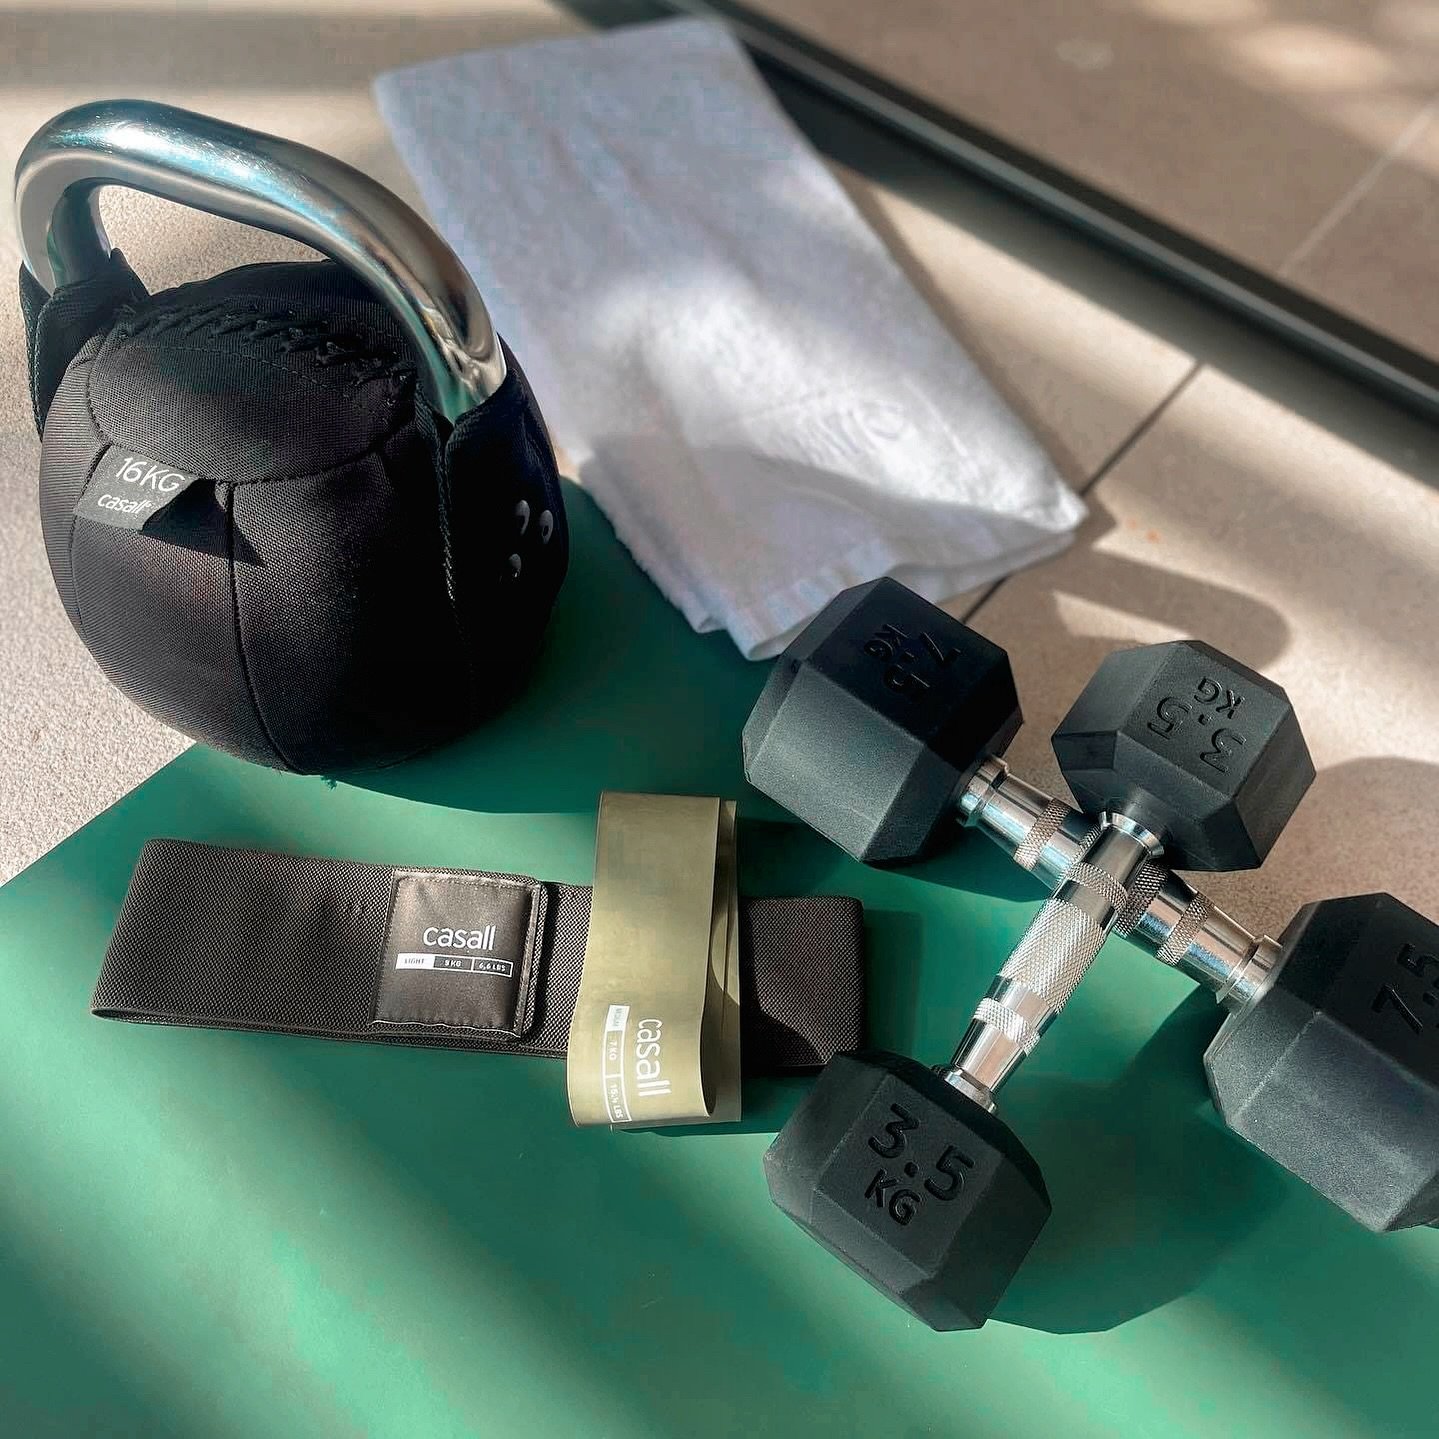 Have you planned your week&rsquo;s training yet? Here&rsquo;s the setup ready for your total body class on Monday morning! 

#FitnessGoals #MondayMotivation #GoodQualityEquitment @casalltraining